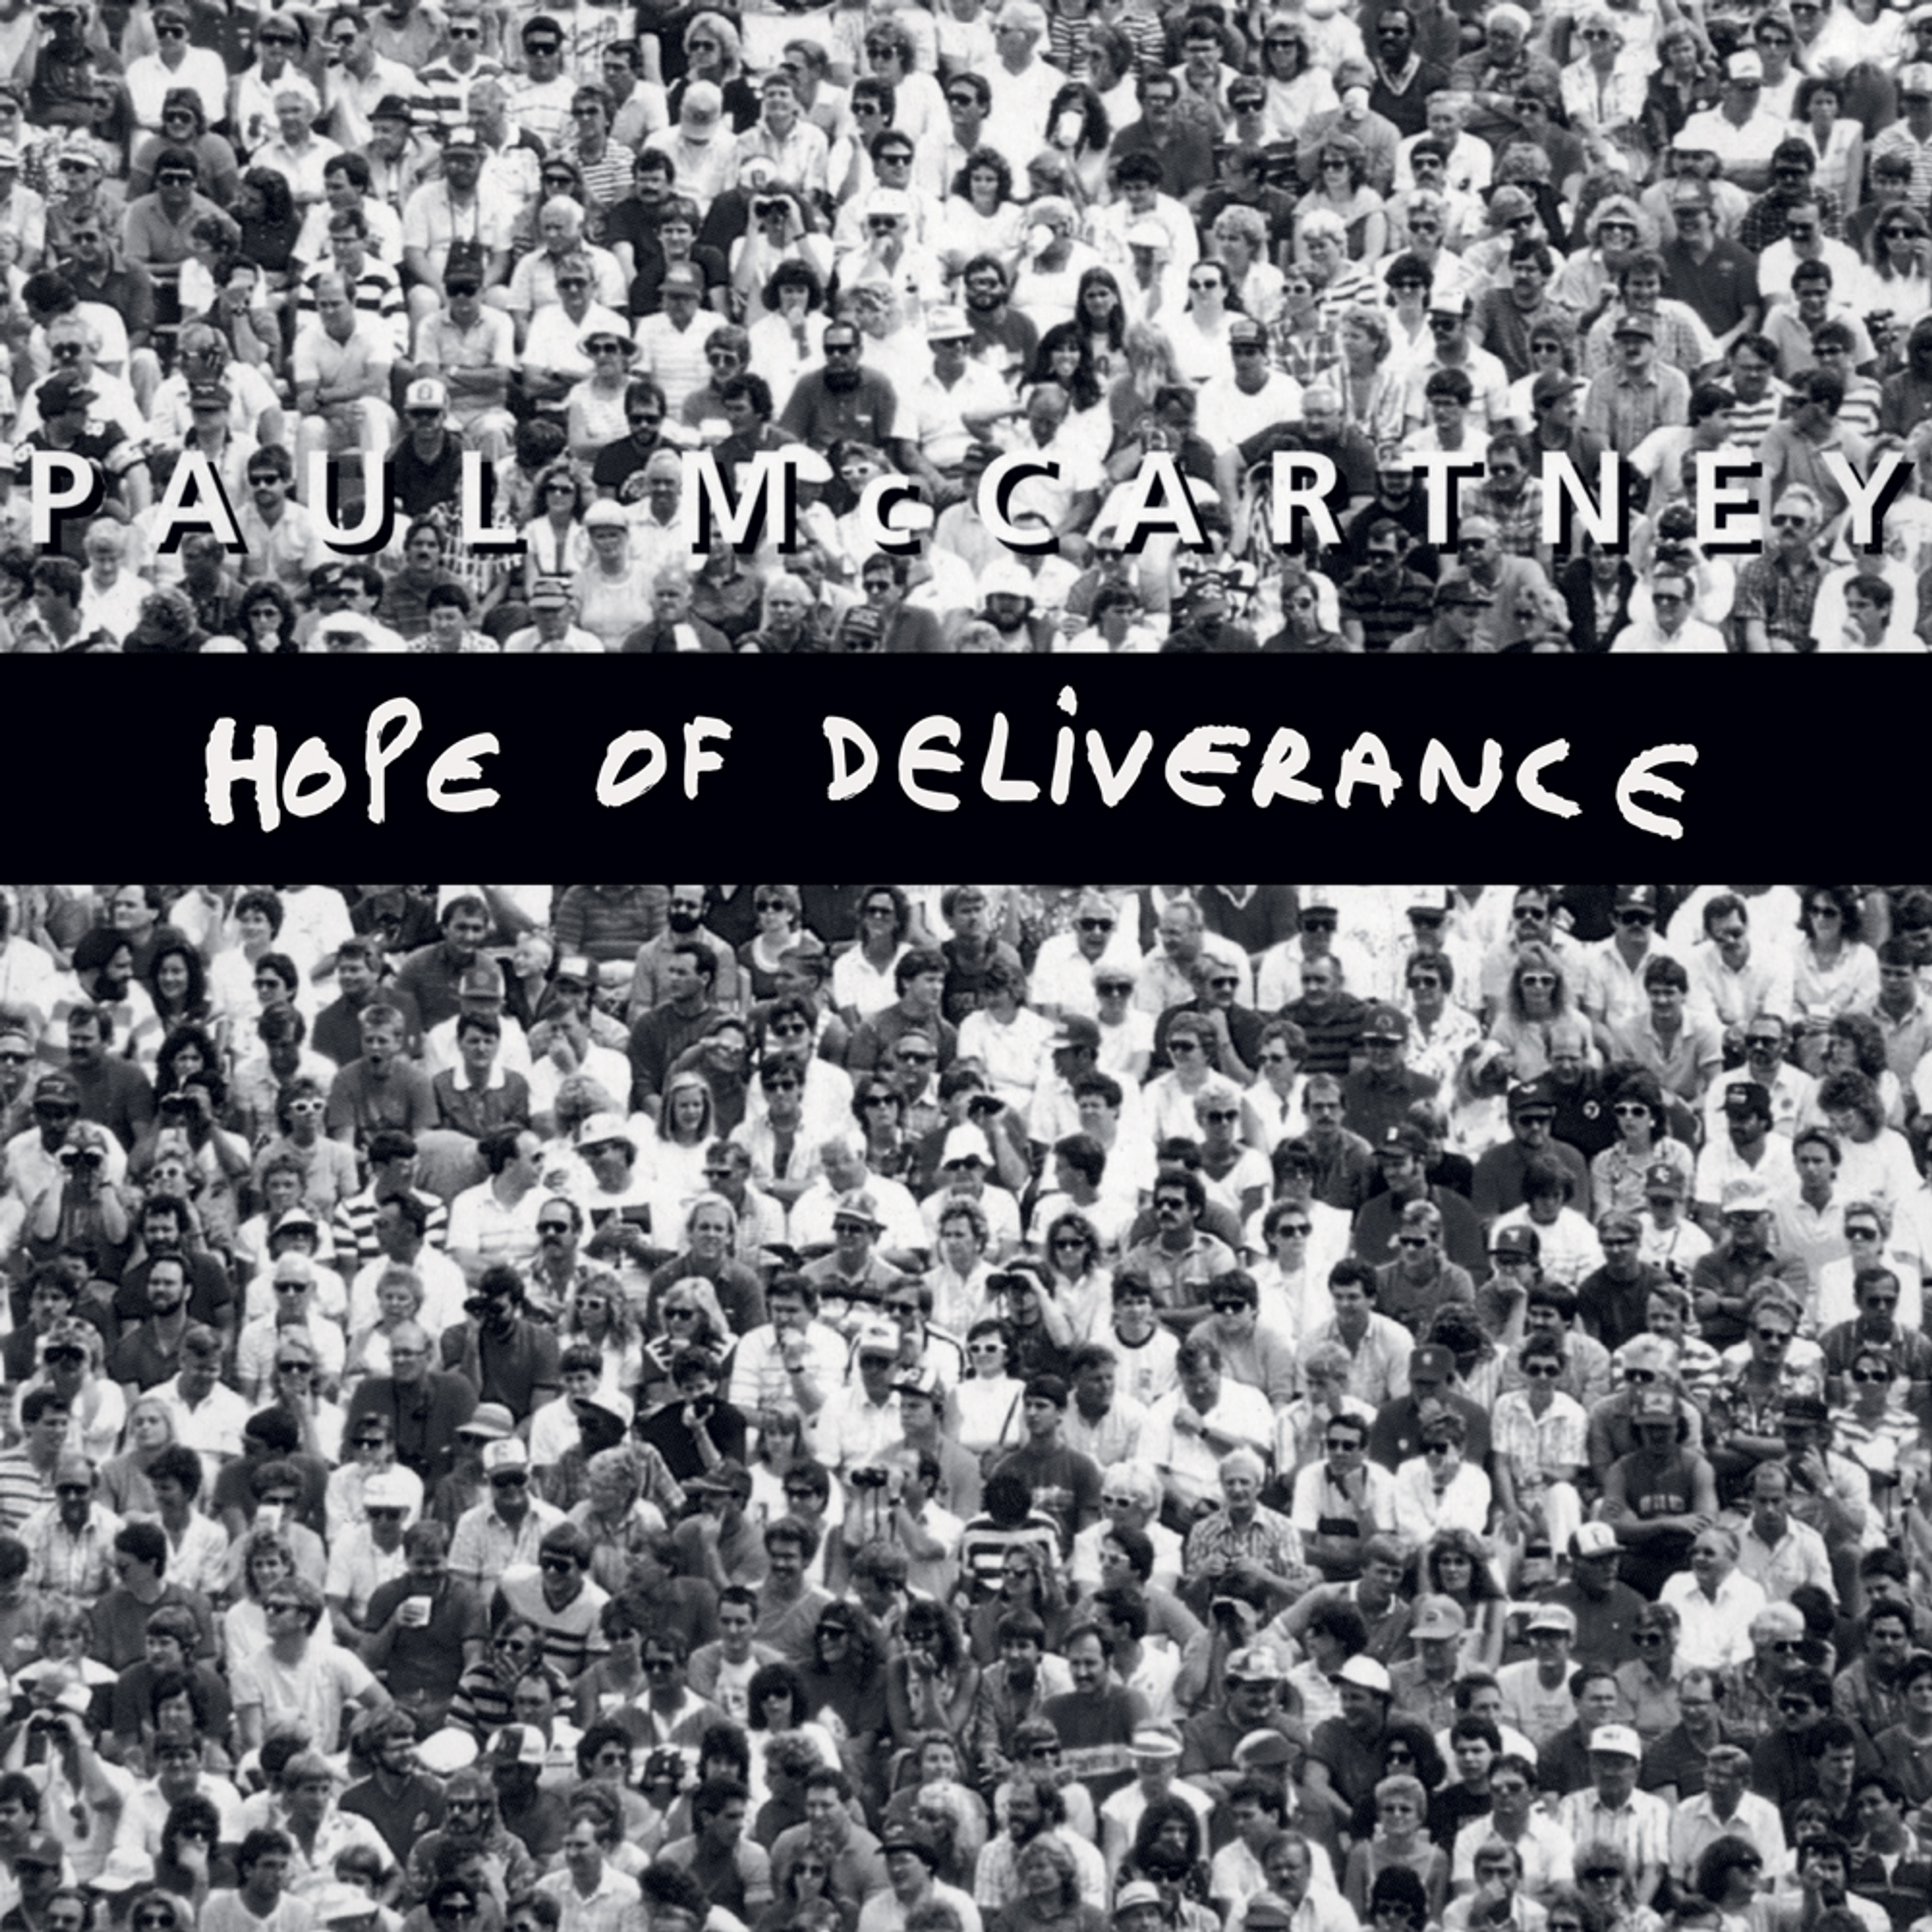 “Hope Of Deliverance” Single artwork as featured in 'The 7" Singles Box'